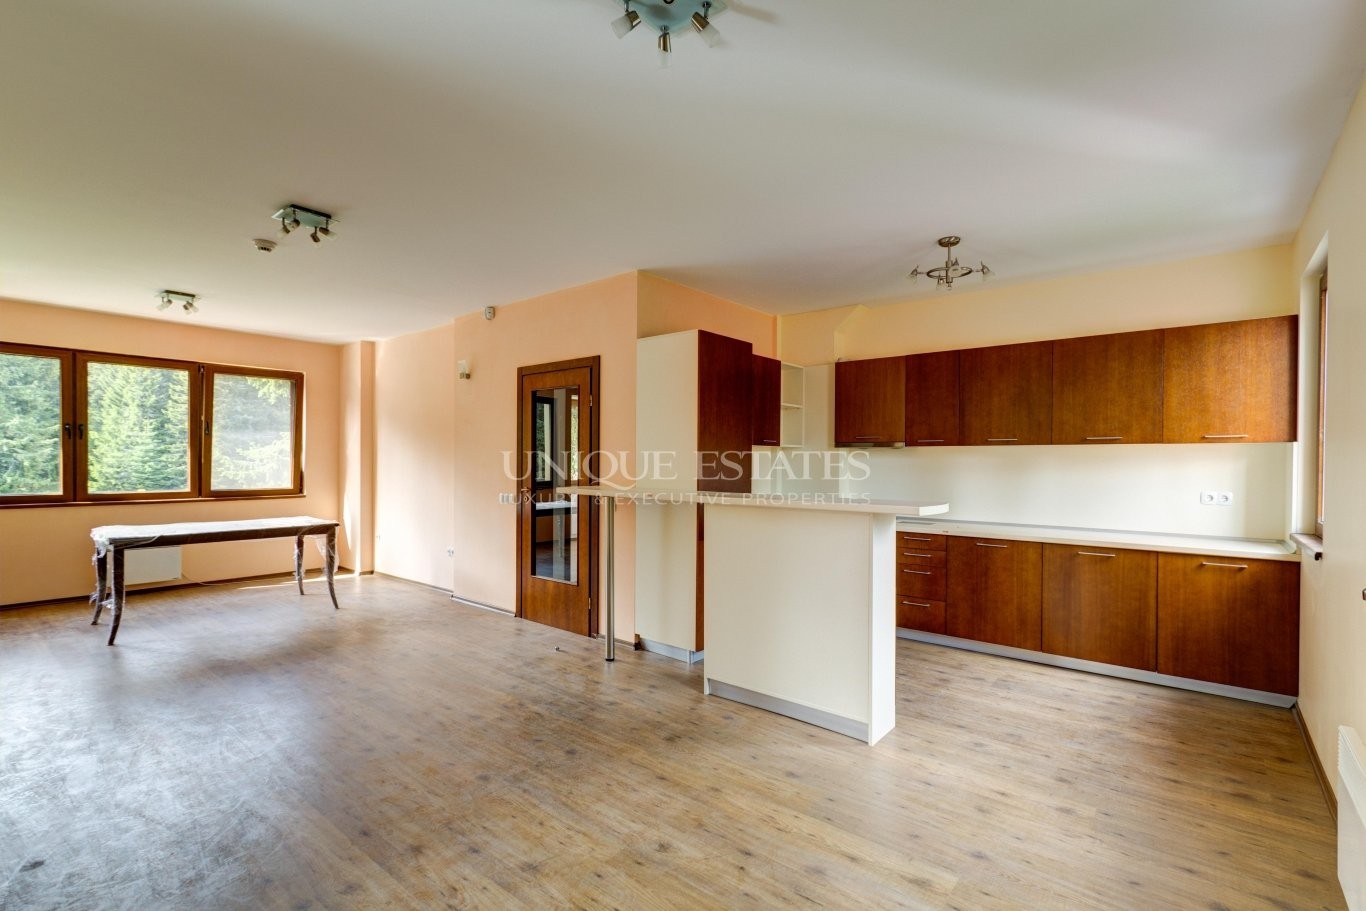 Hotel / Apartment house for sale in Sofia, Natiolan park Vitosha with listing ID: K6145 - image 5